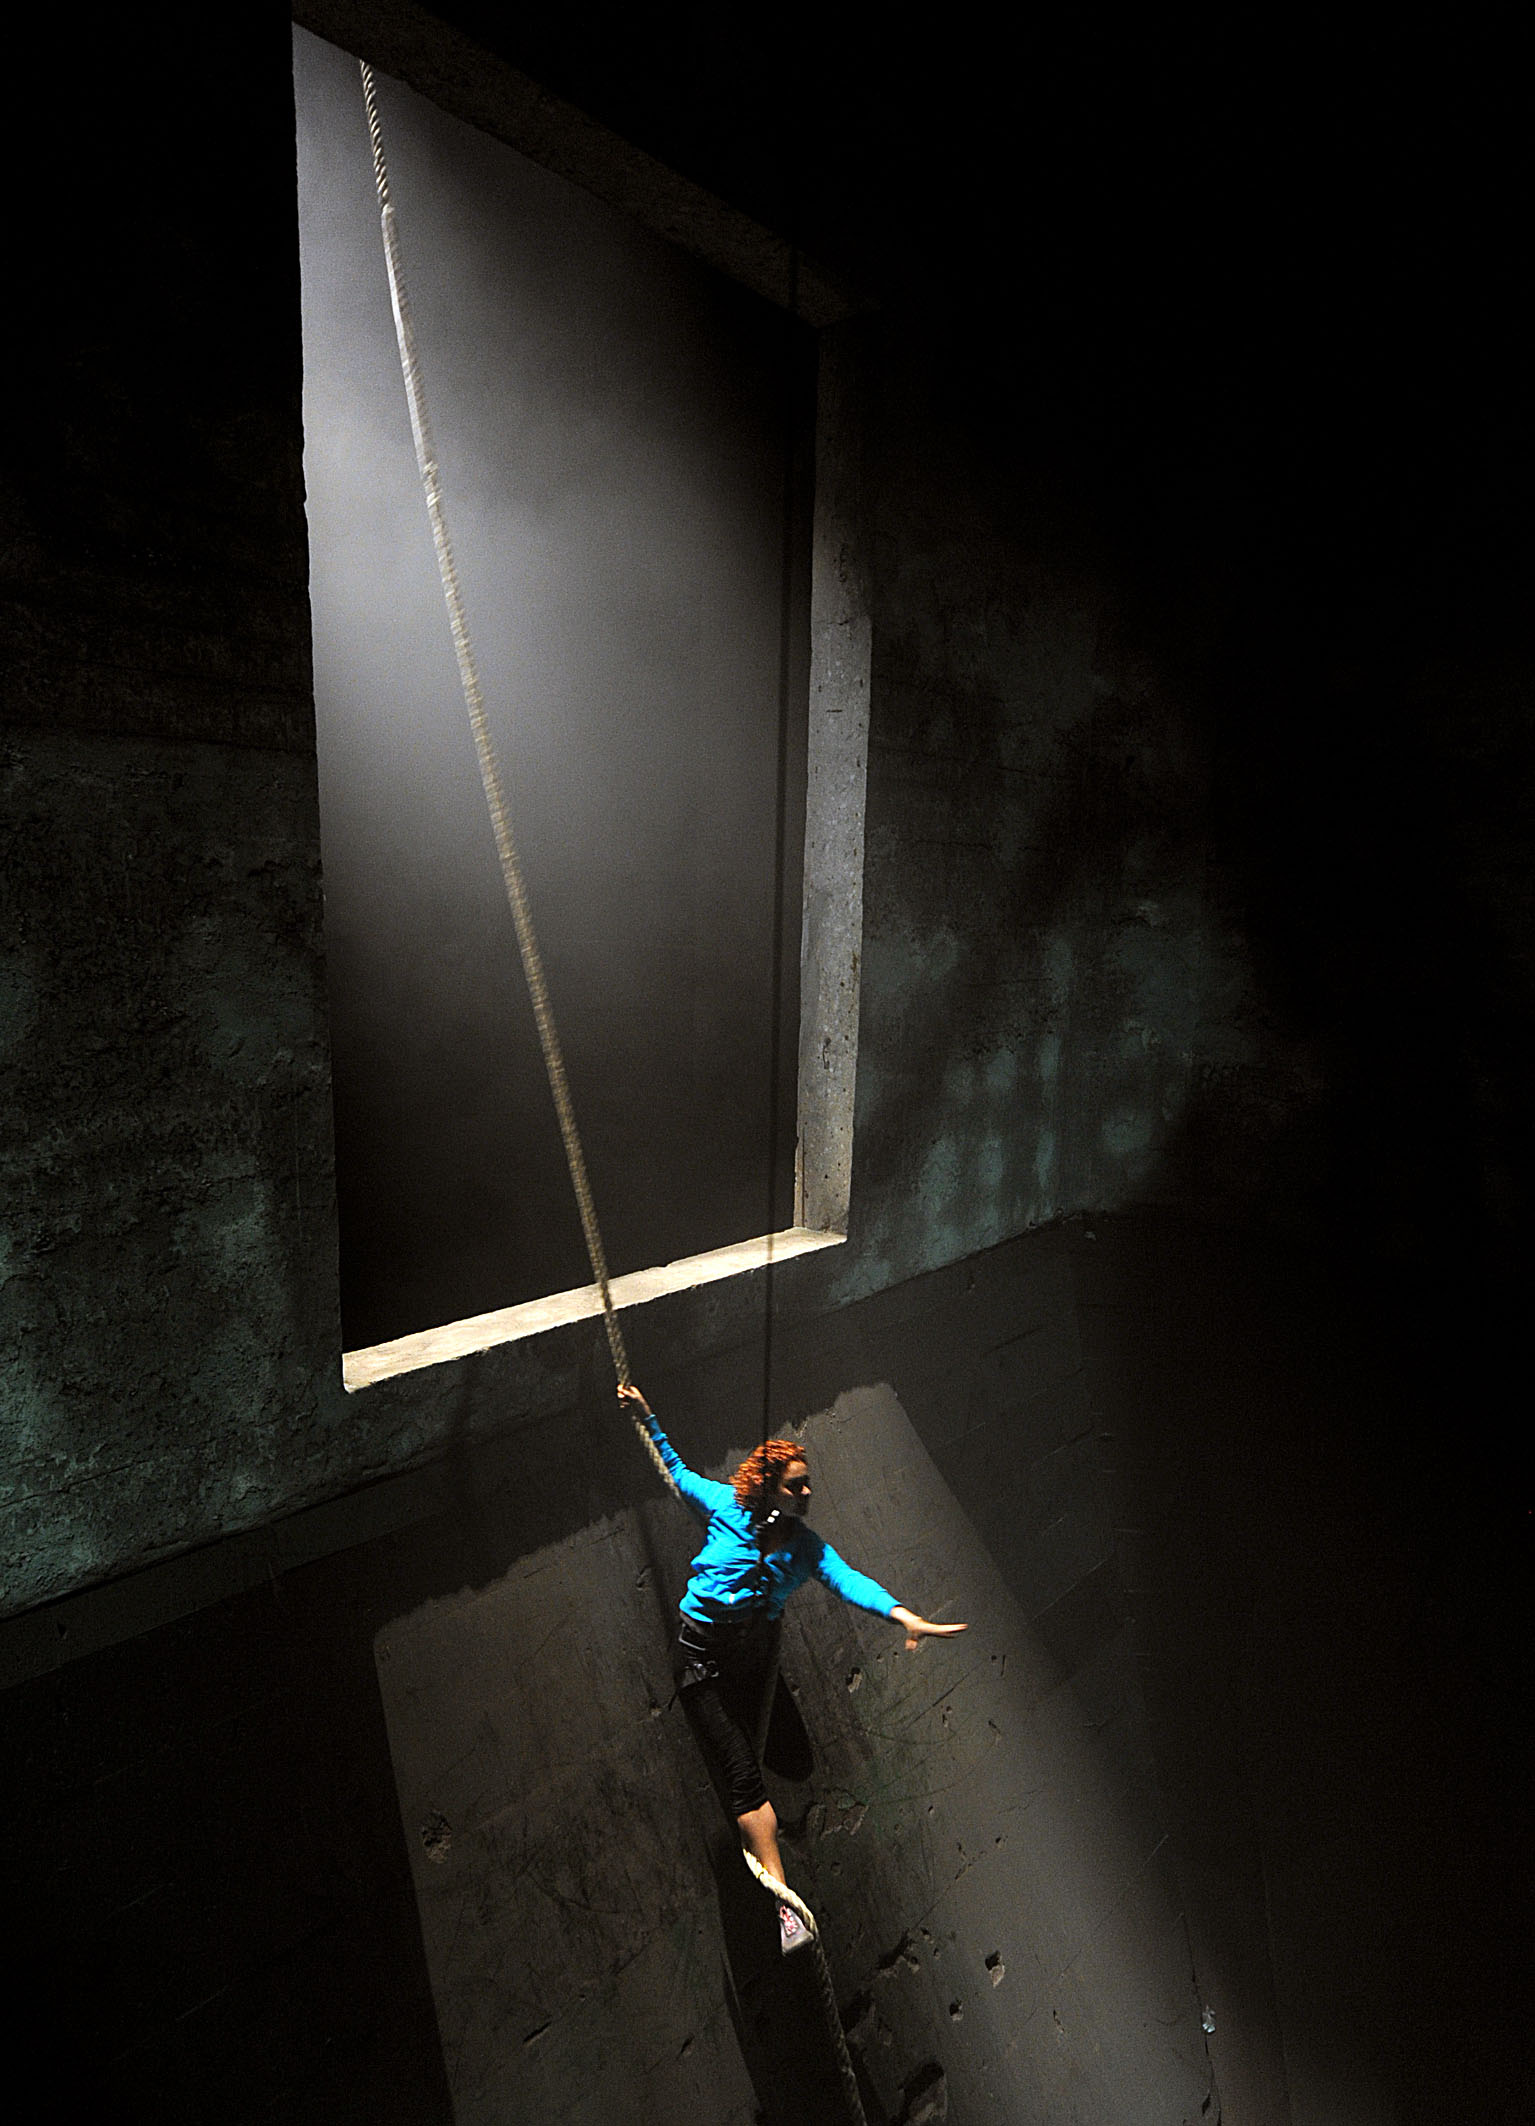 a performer in a blue top and black shorts dangles from a rope with one hand. The rope is hanging from the top of a long concrete shute.